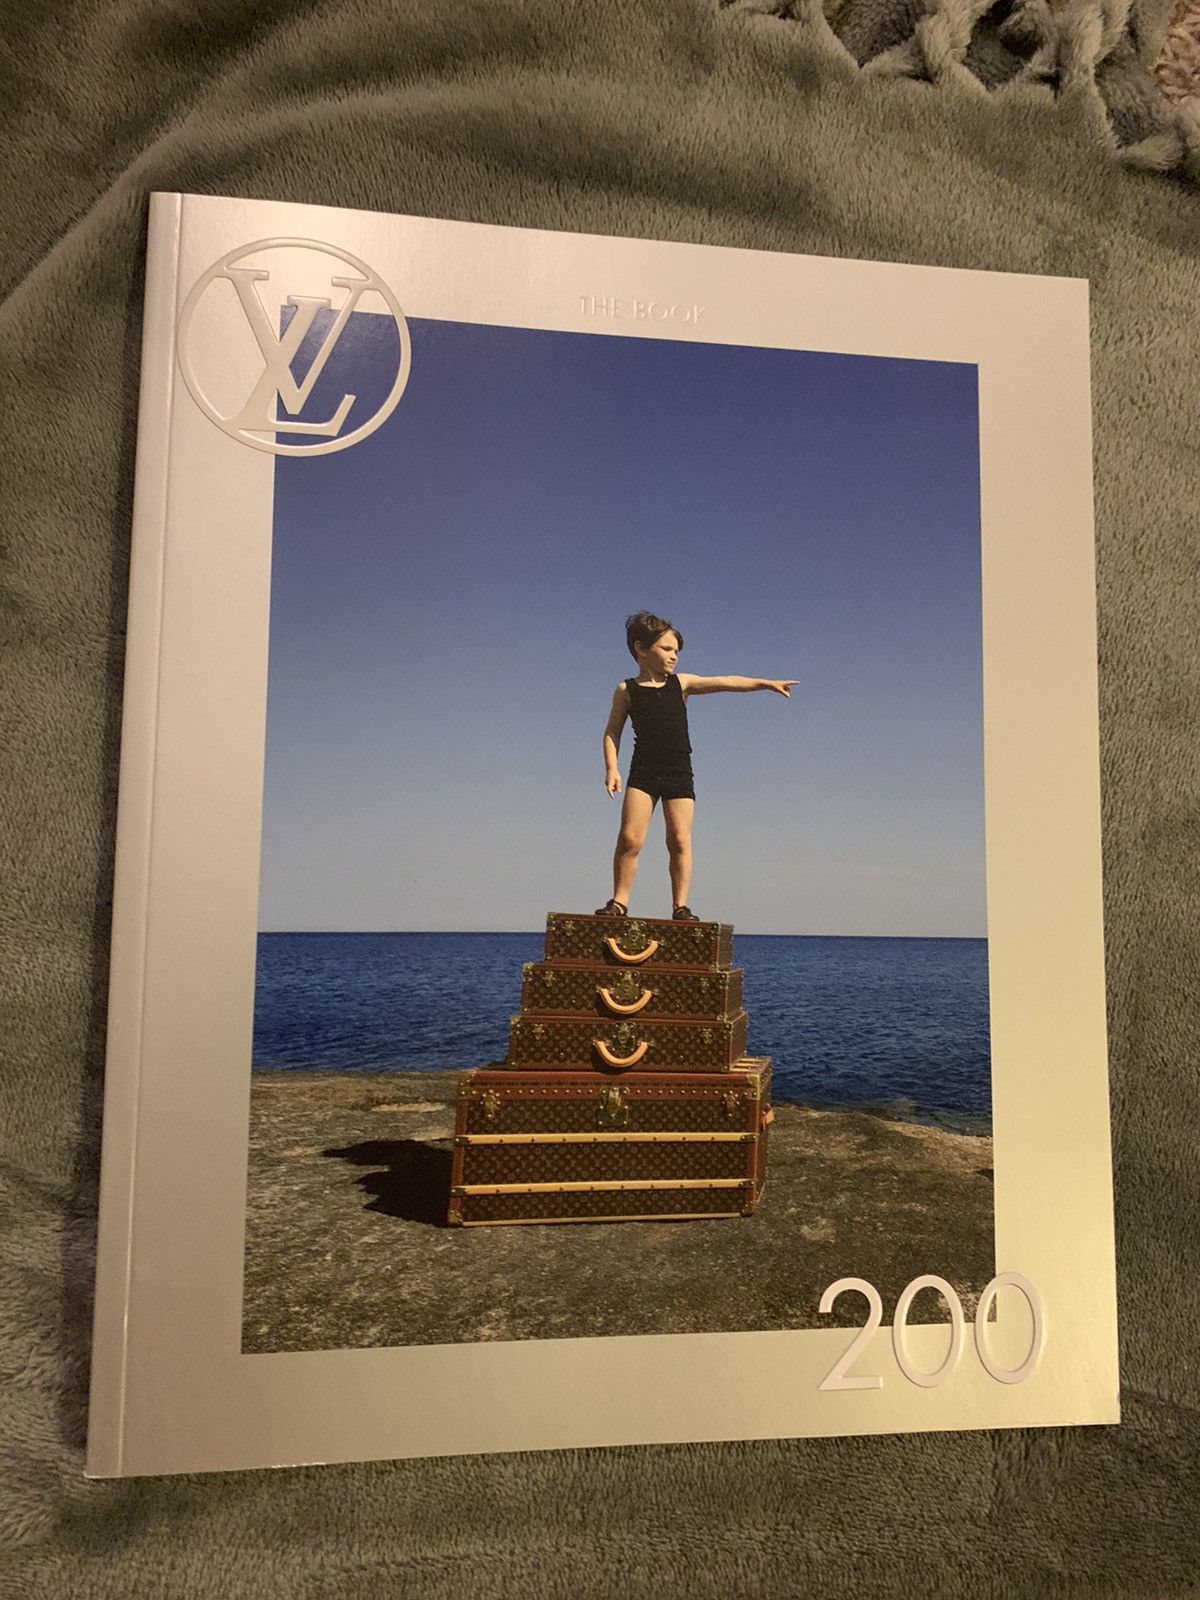 Louis Vuitton THE BOOK #200, LIMITED EDITION! LV speedy neverfull VIRGIL  ABLOH